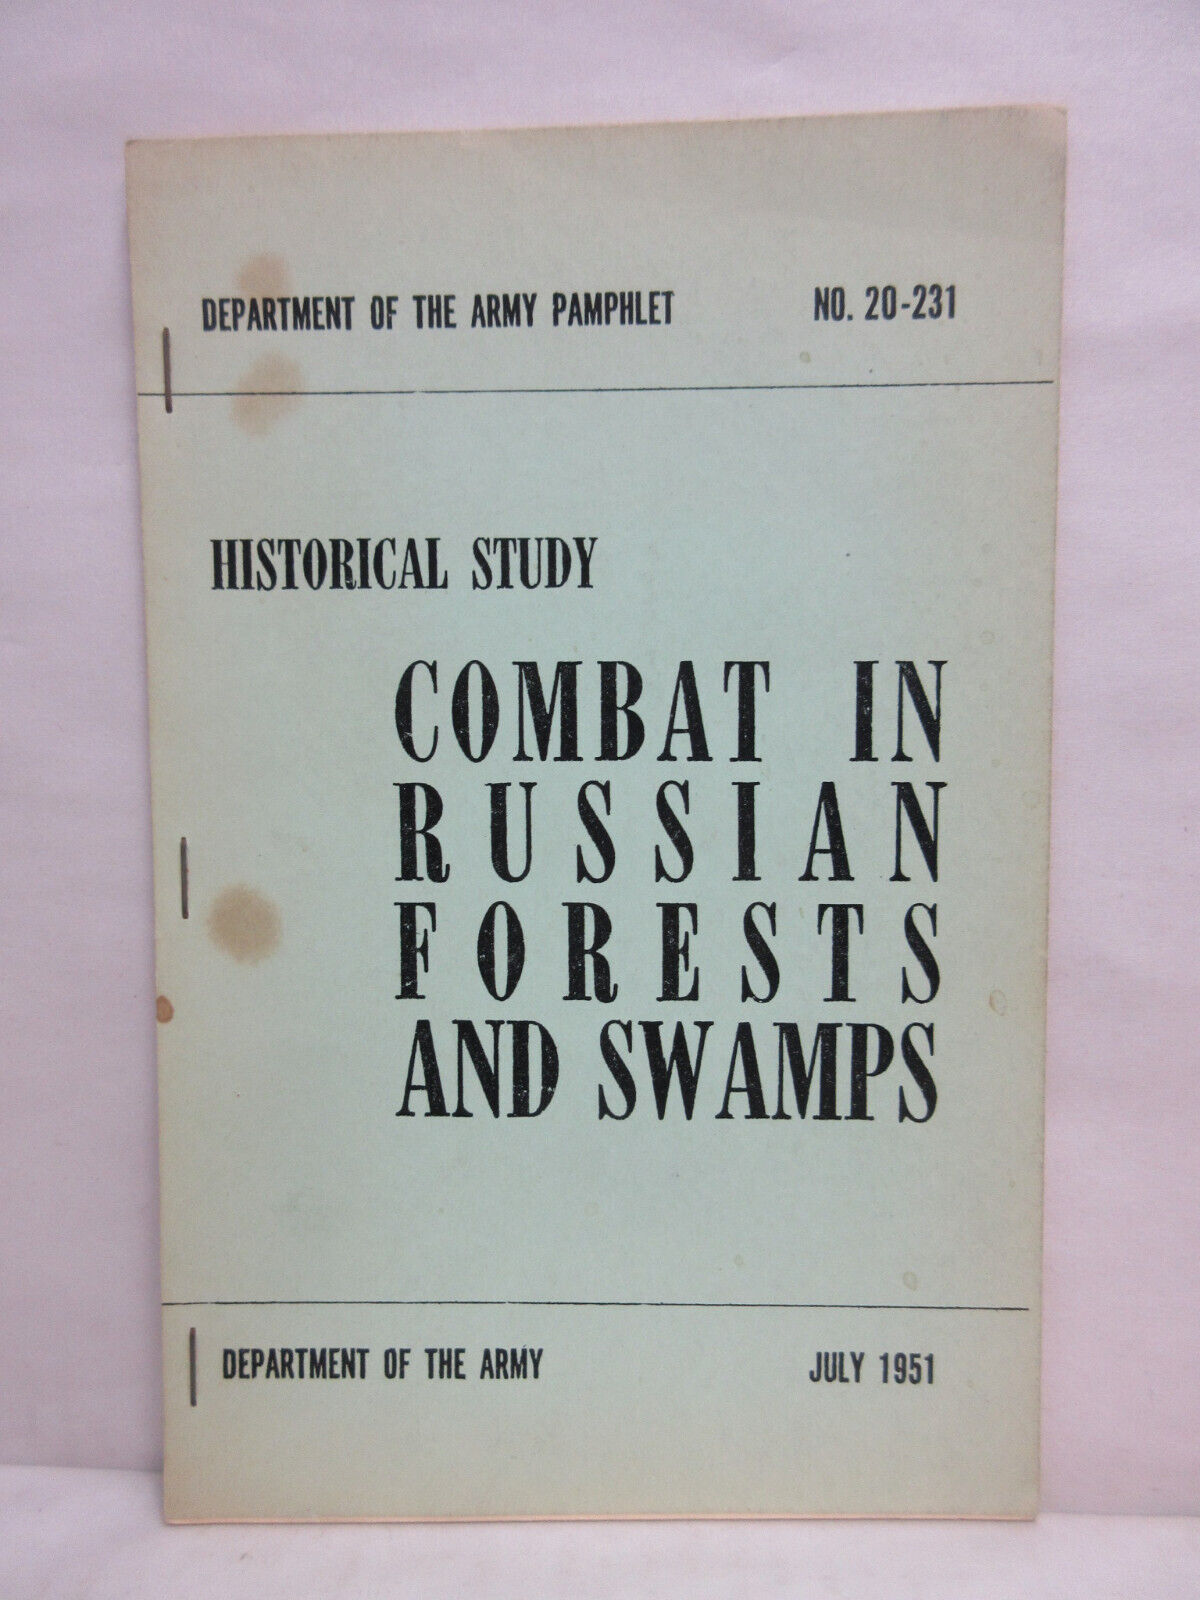 Historical Study of Combat in Russian Forests & Swamps July 1952 Army Pamphlet